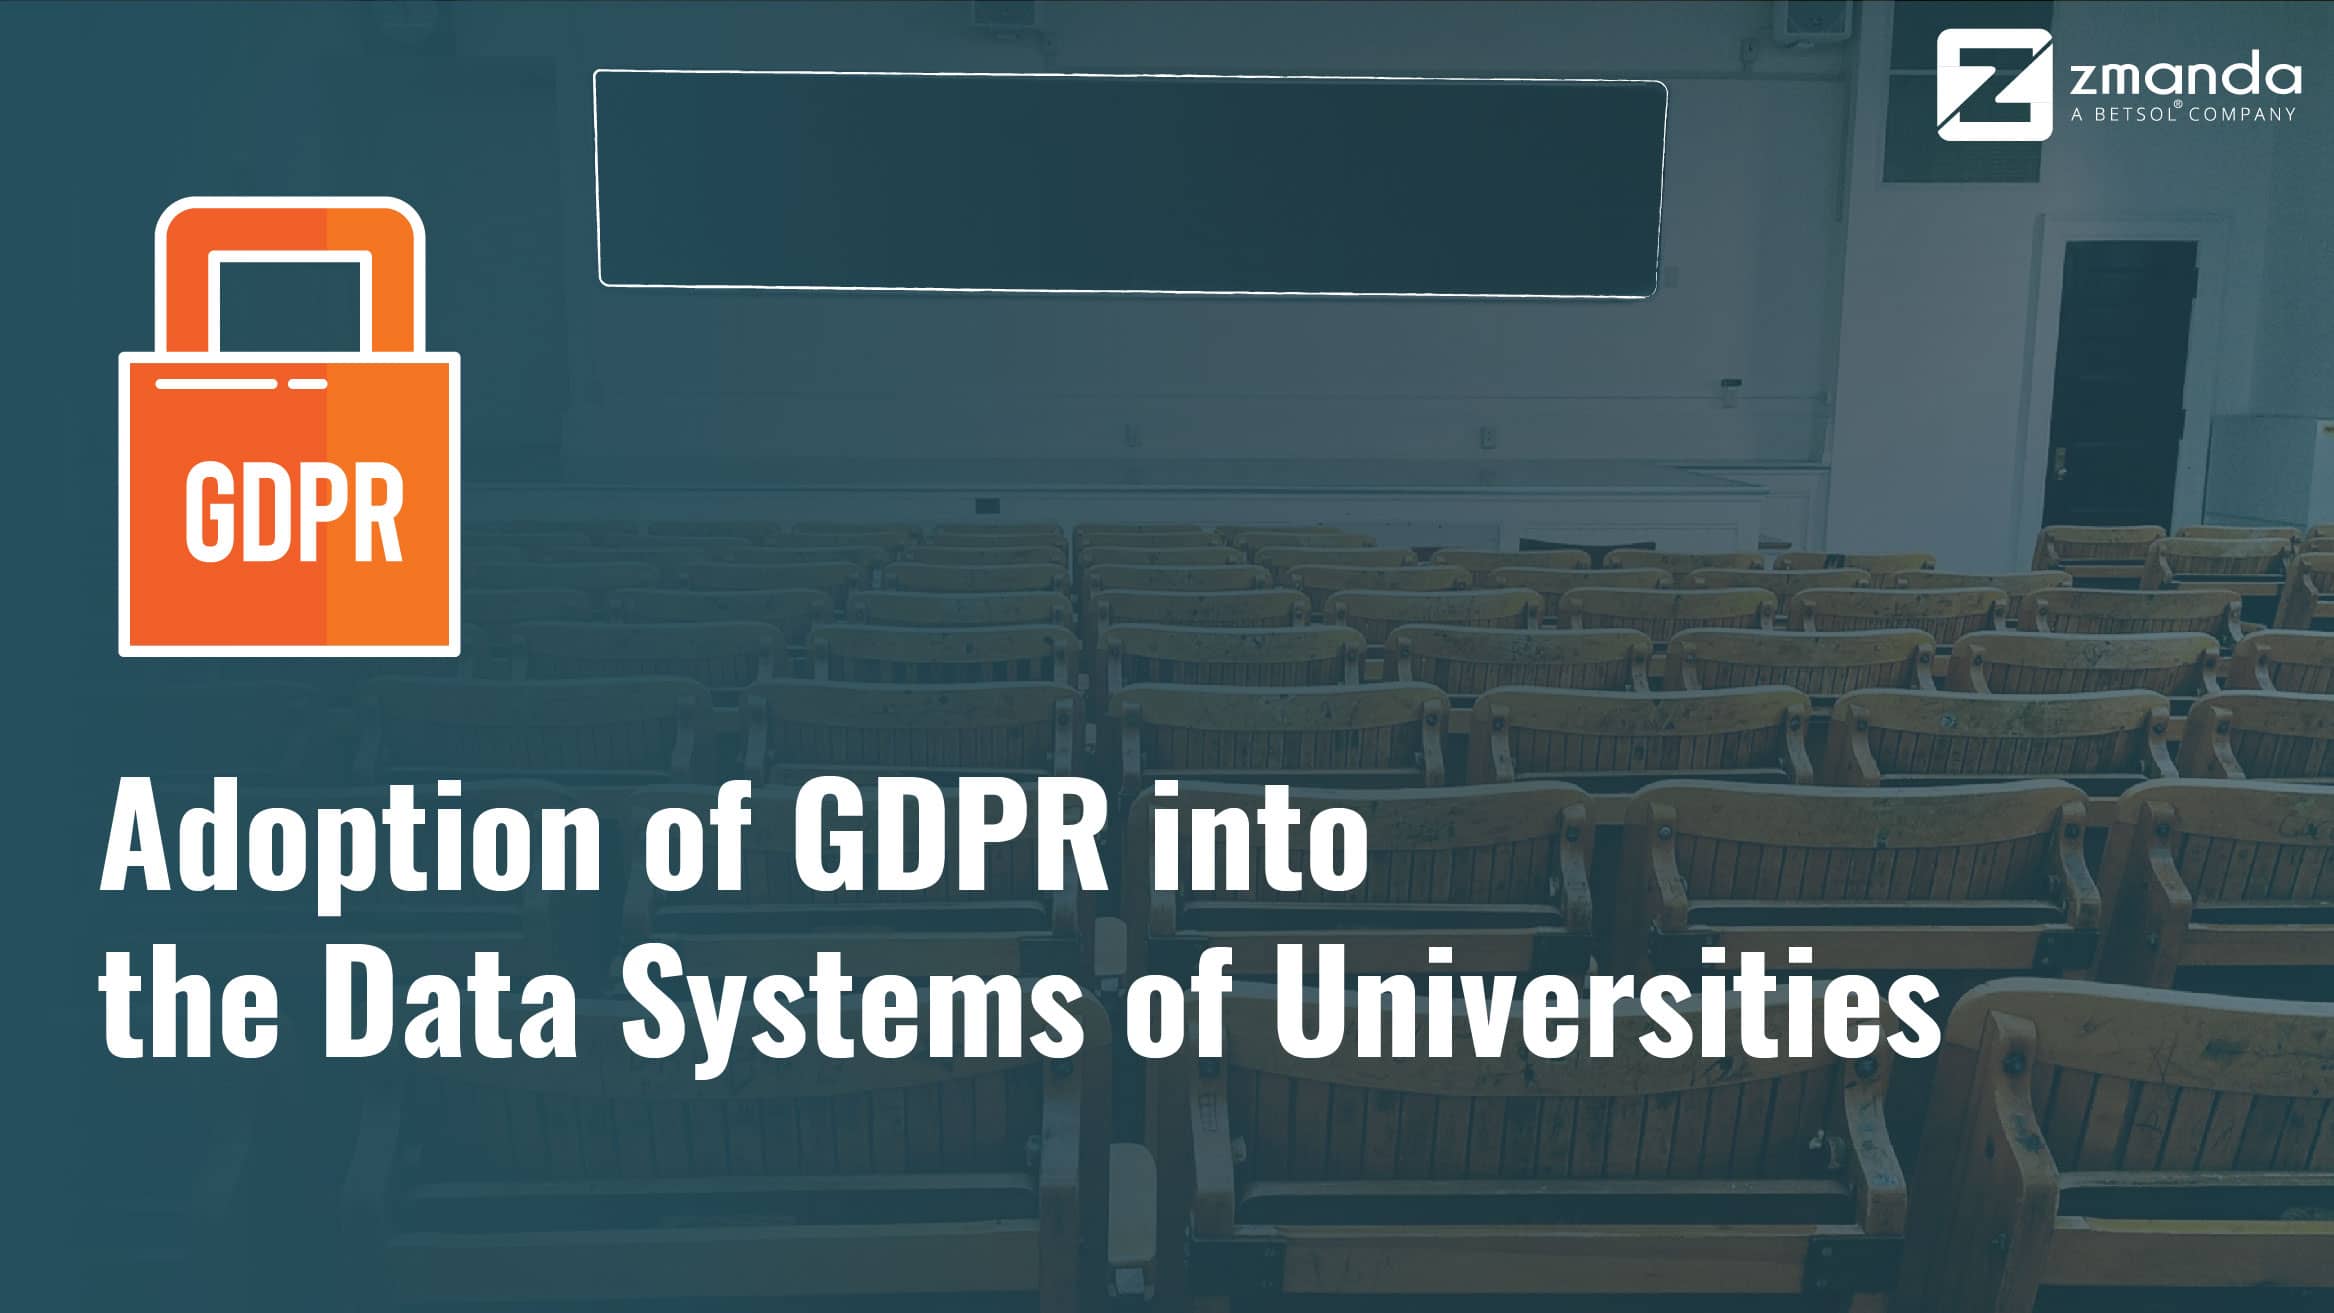 Adoption of GDPR into the data systems of universities